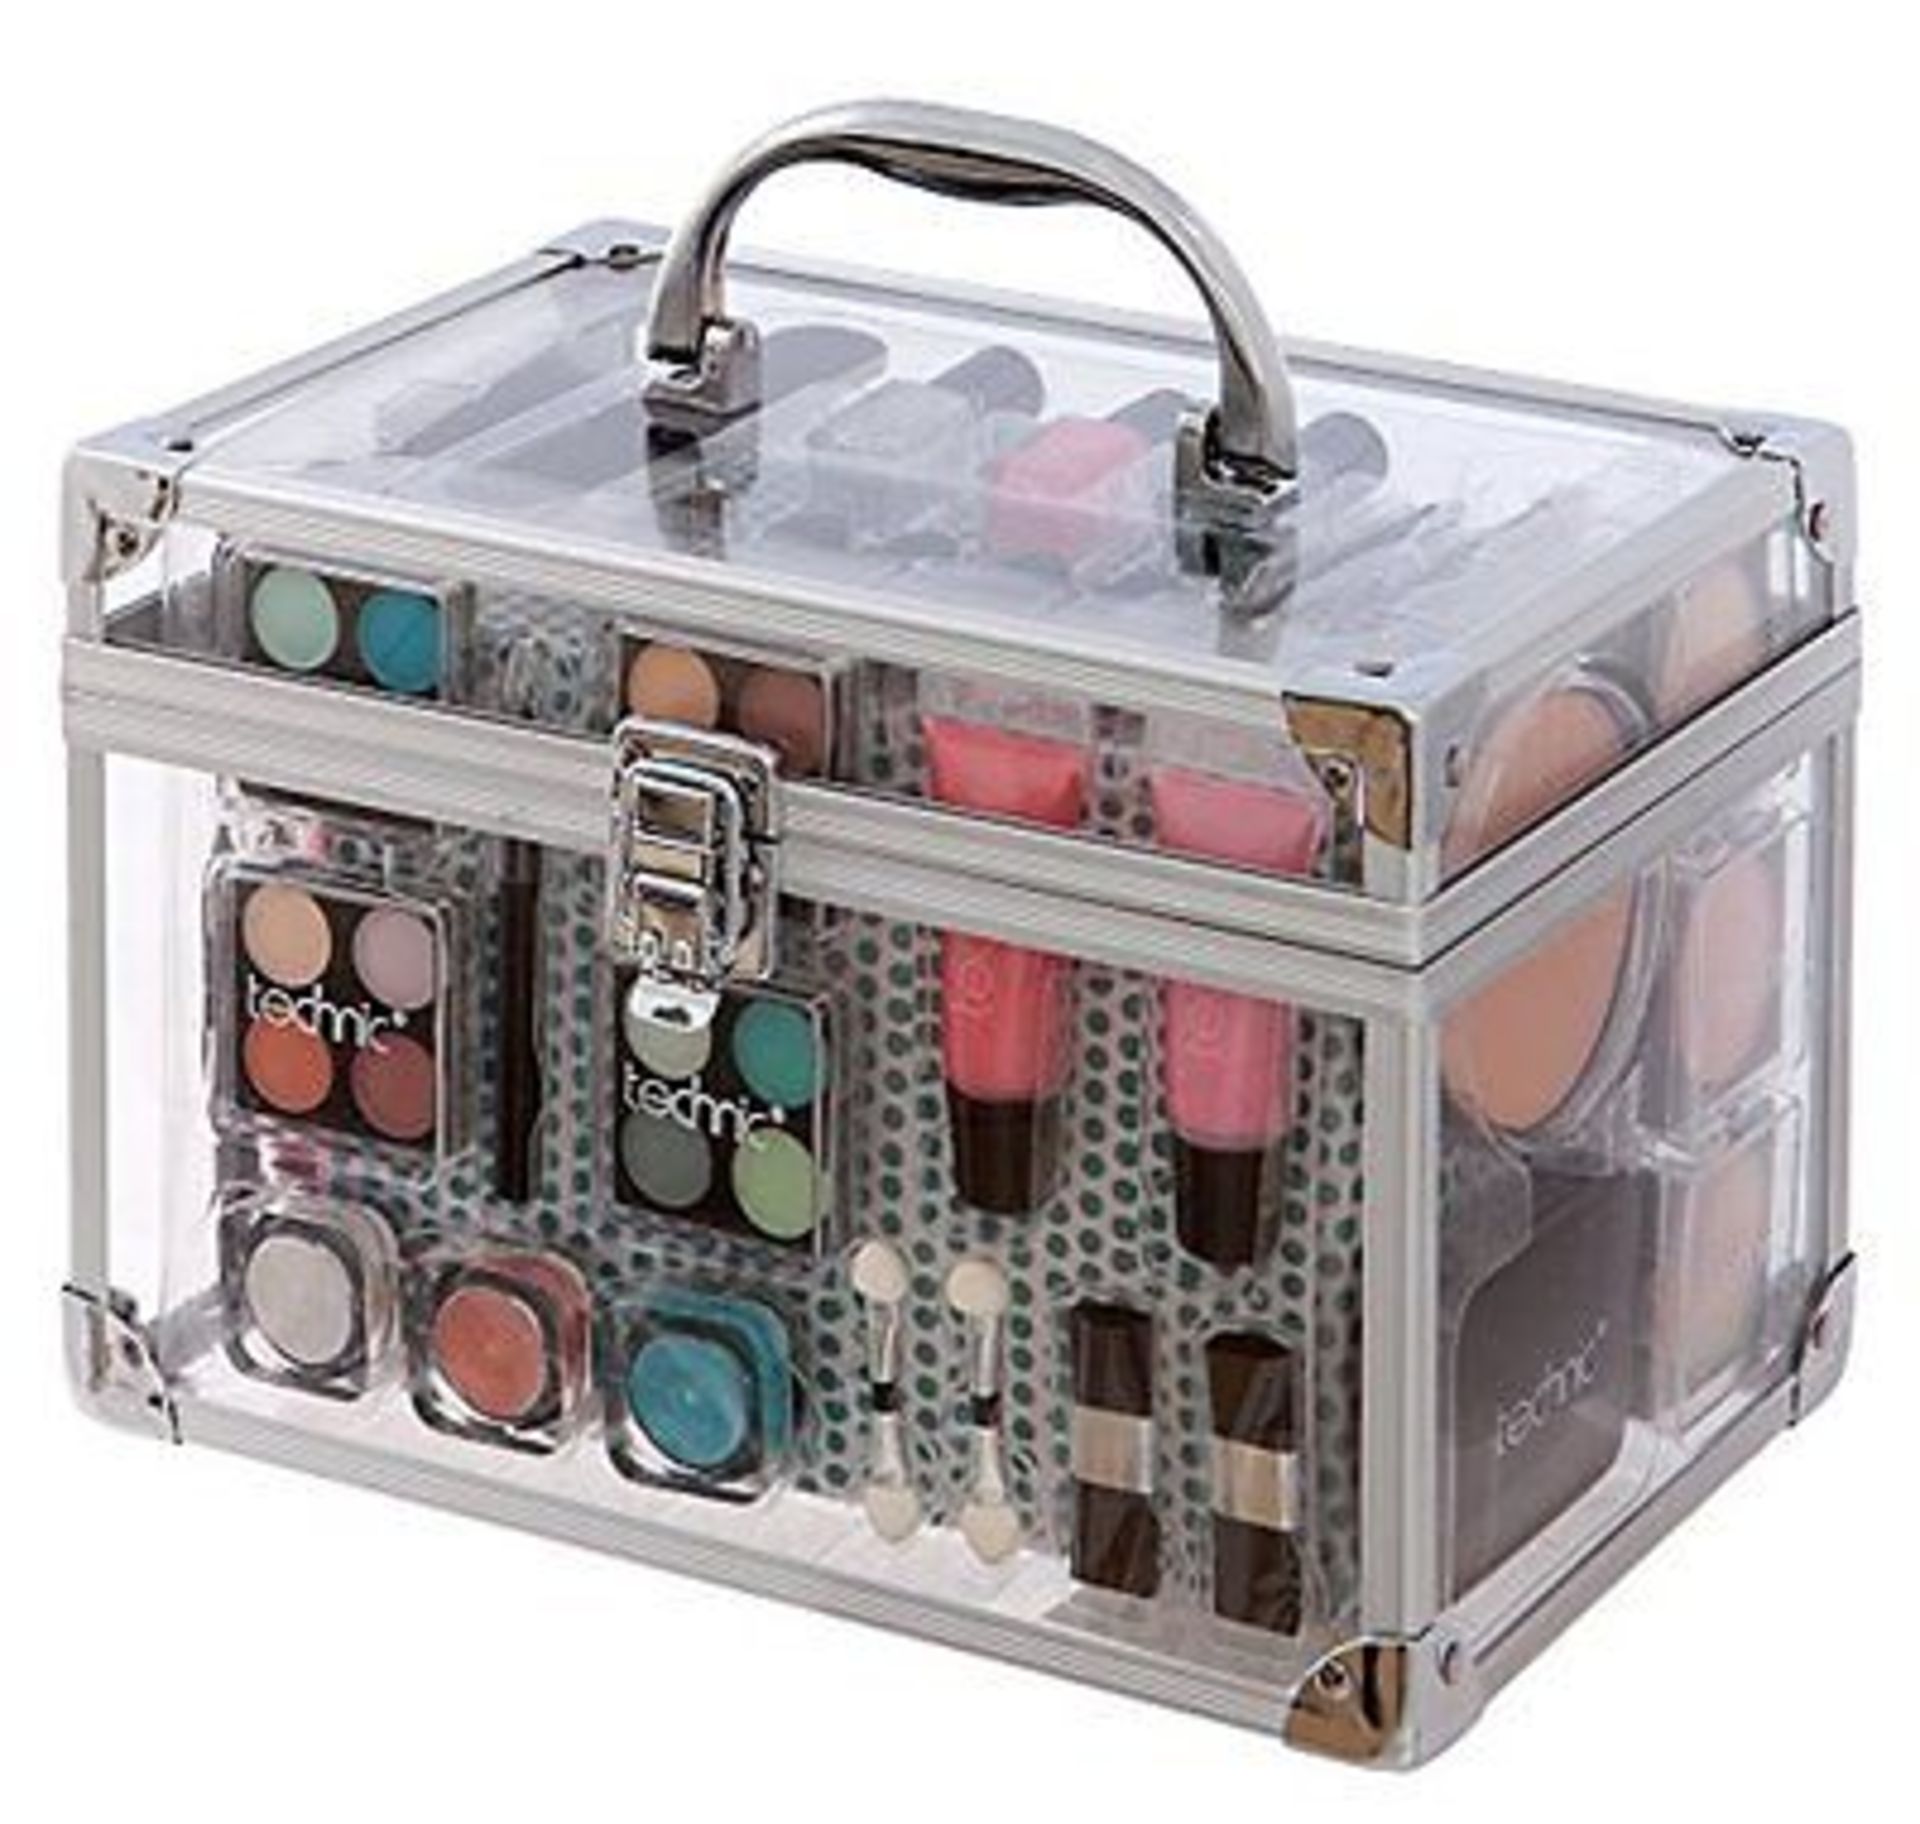 + VAT Brand New Miss Cutie Pie Clear Carry Case Make Up Set ISP £45.35 (Amazon) - Image 2 of 2